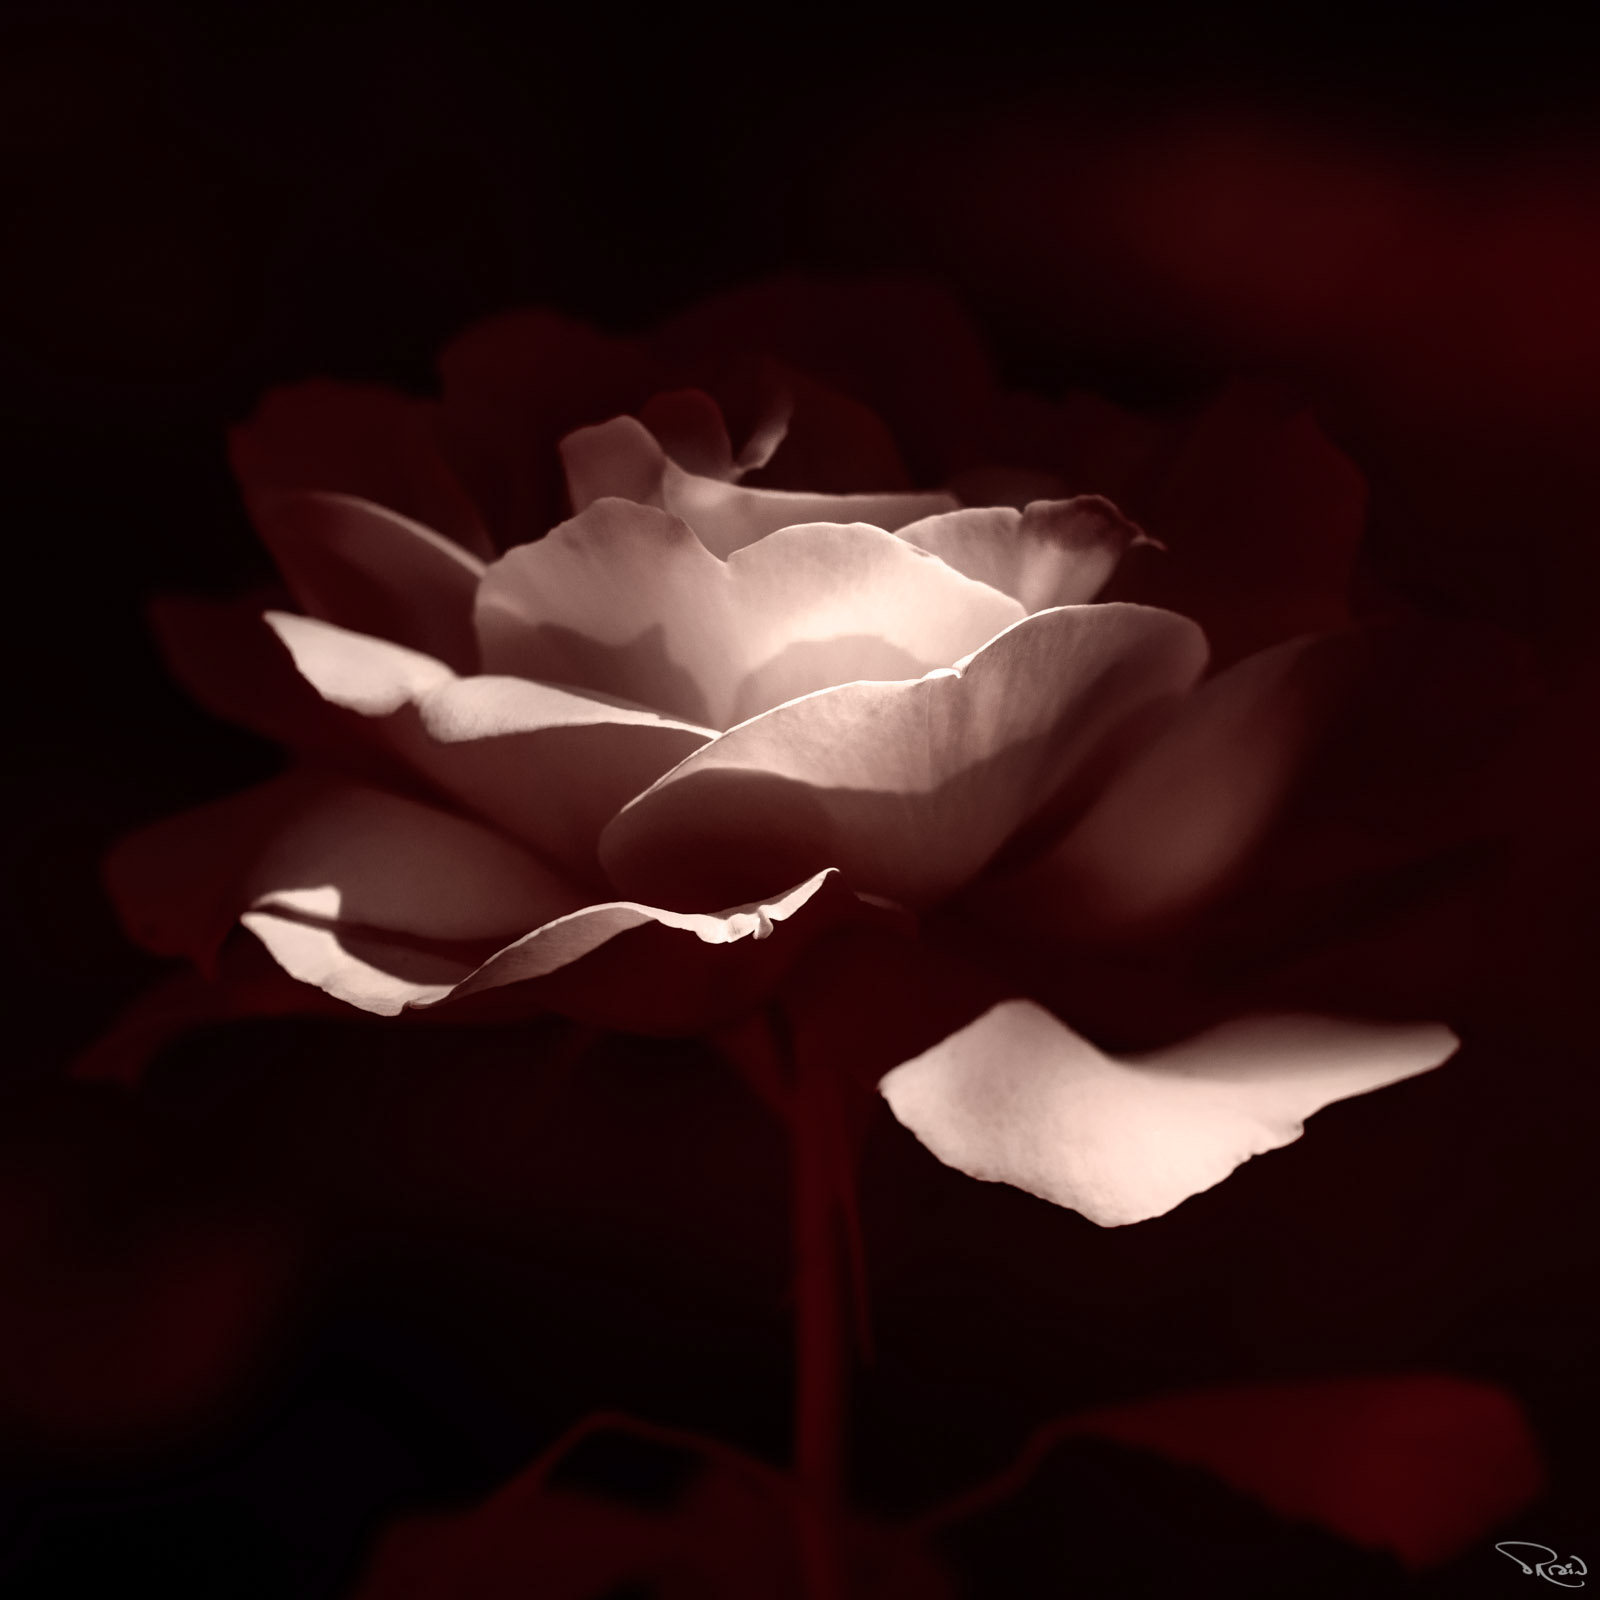 A delicately colored rose in full bloom is partially revealed by a ray of light against a dark background.